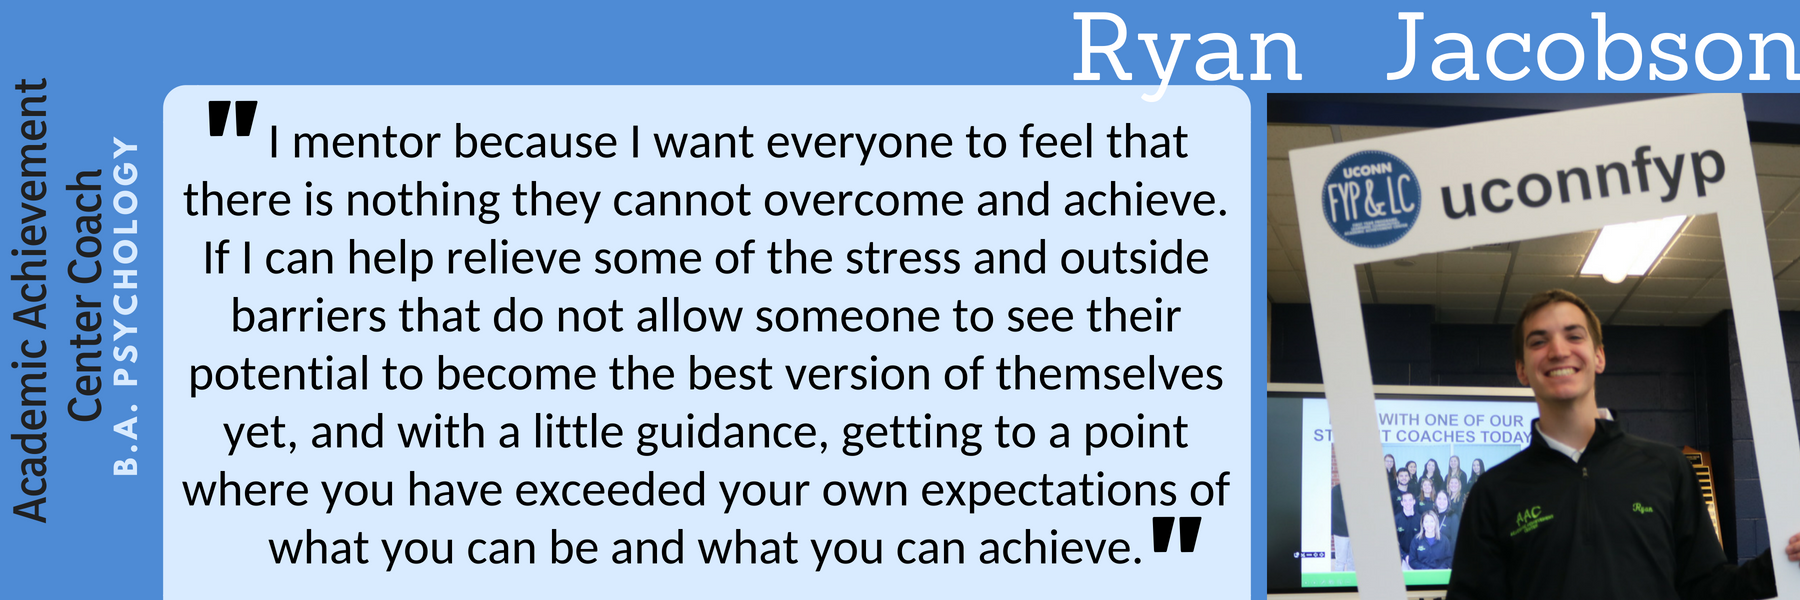 Ryan Jacobson Why I mentor